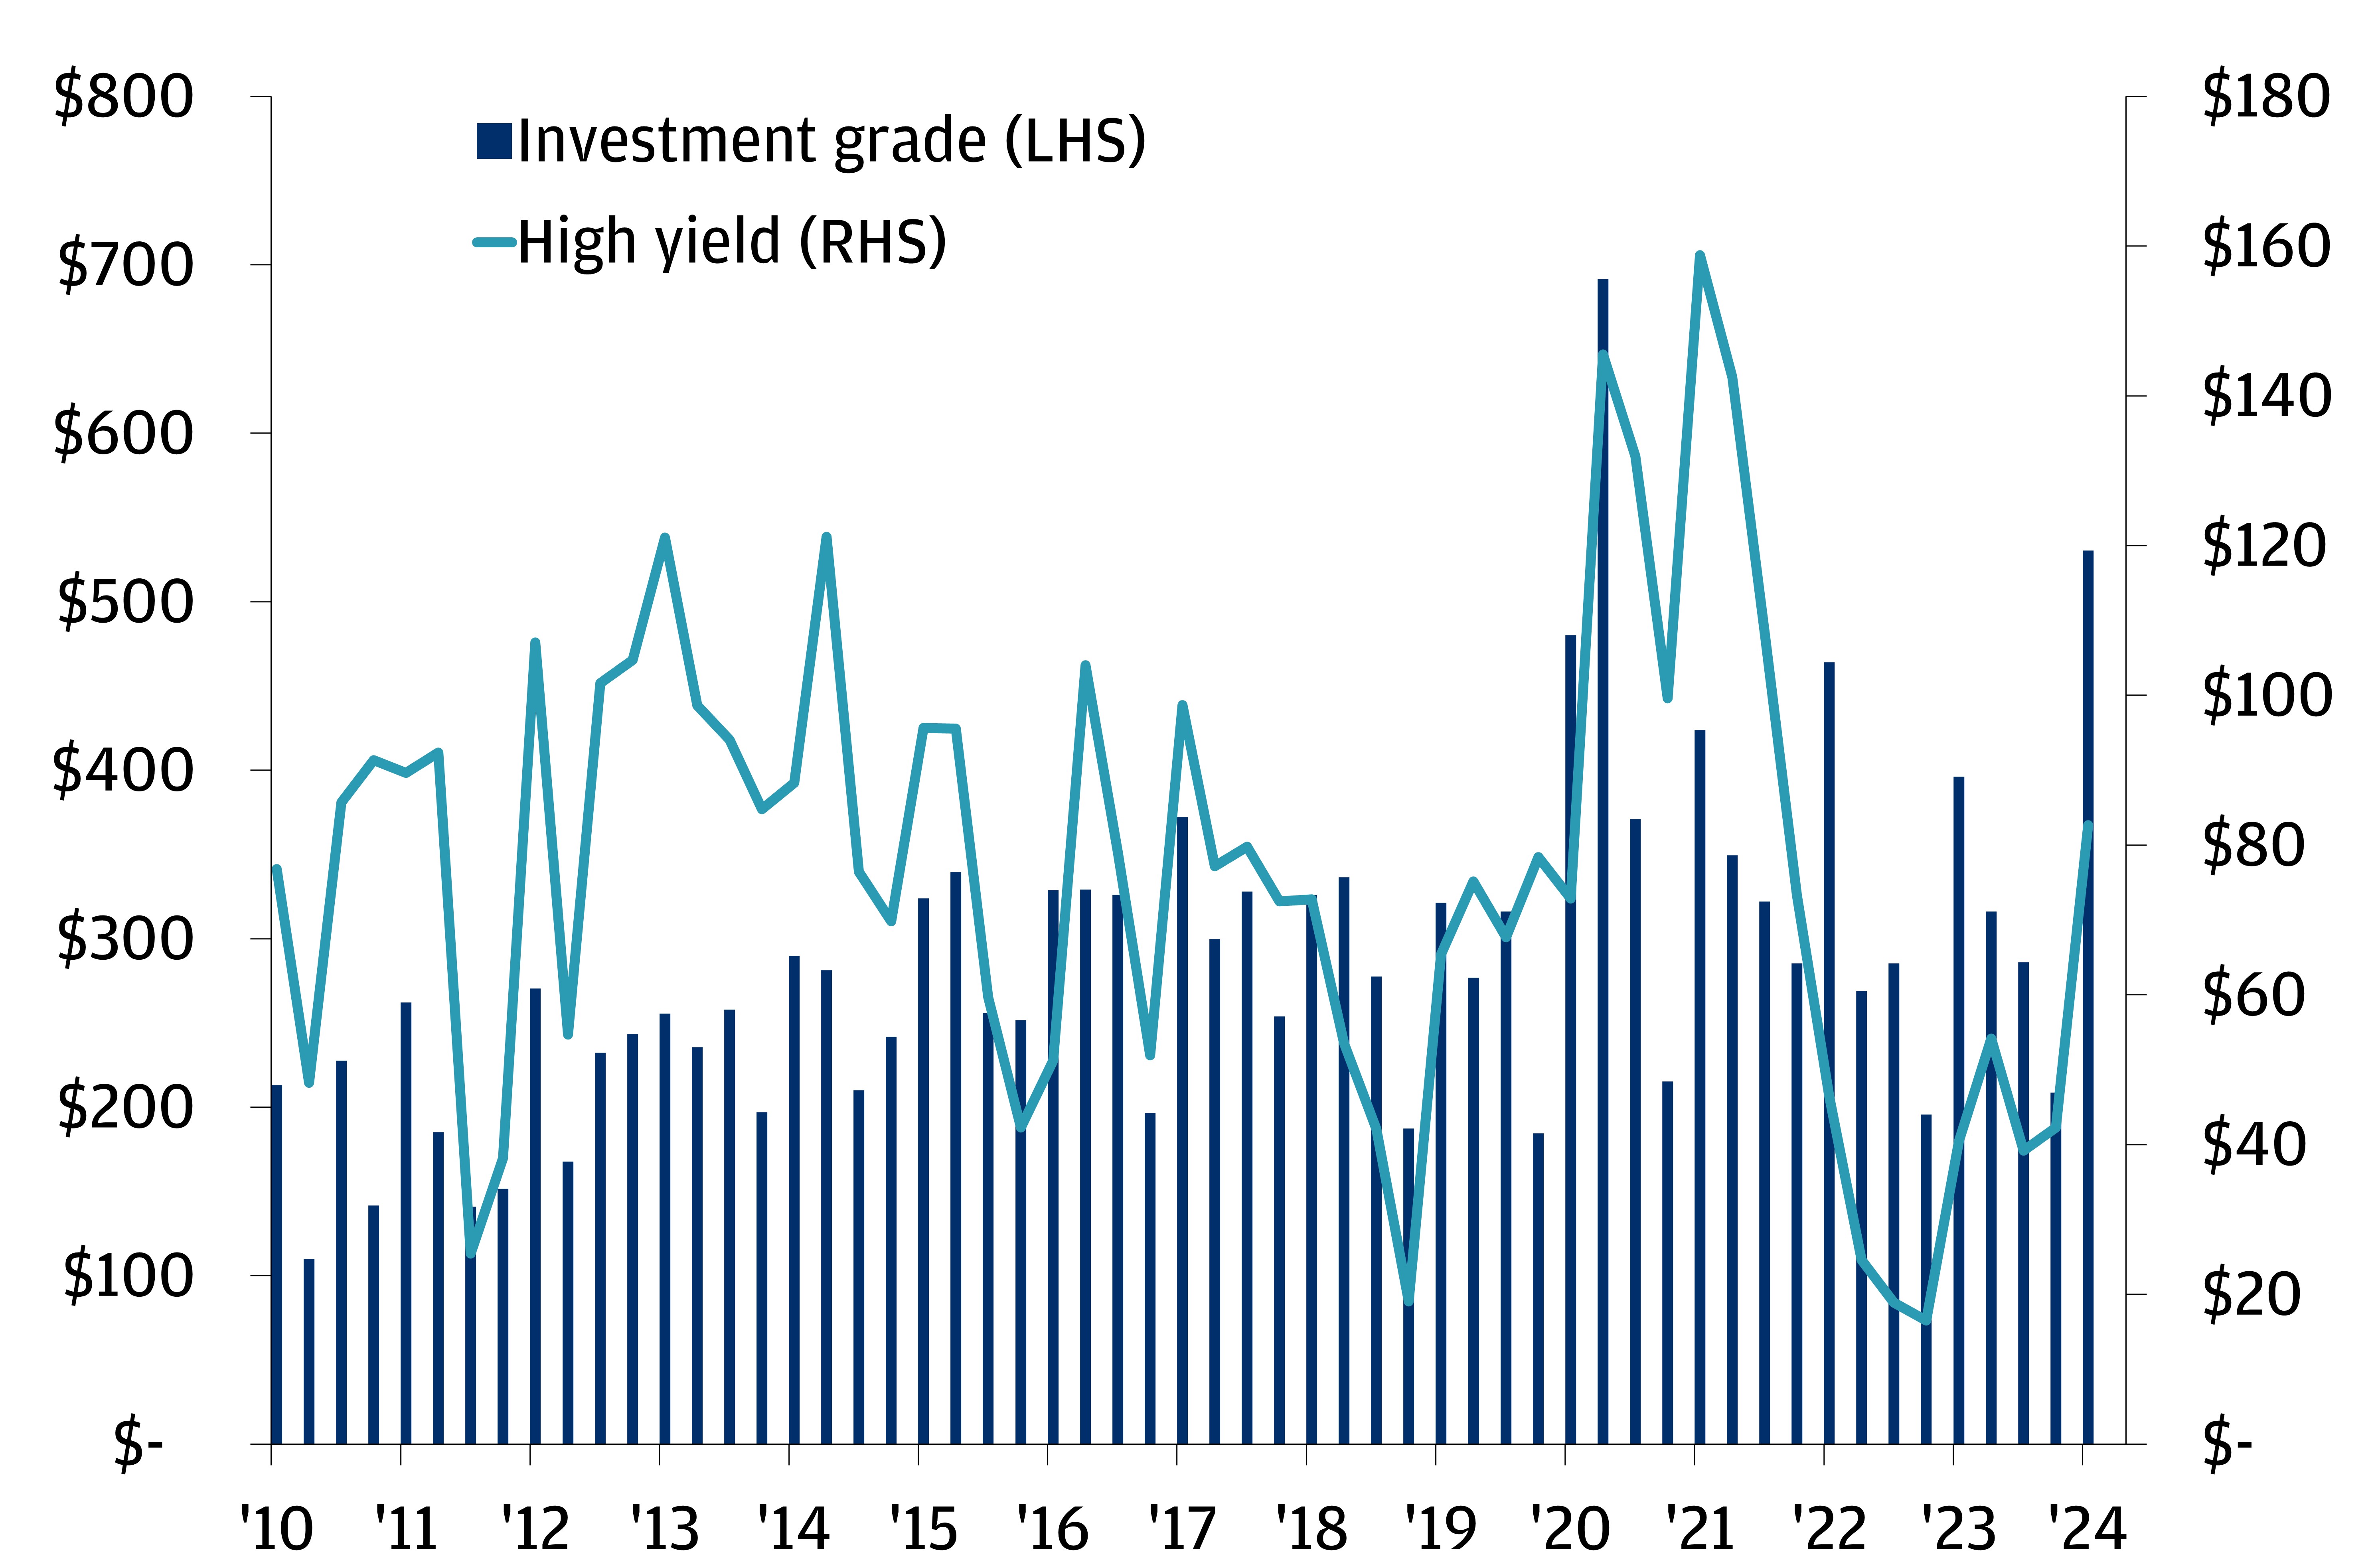 This chart shows investment grade and high yield gross issuance in billions USD from 1Q10 to 1Q24. 